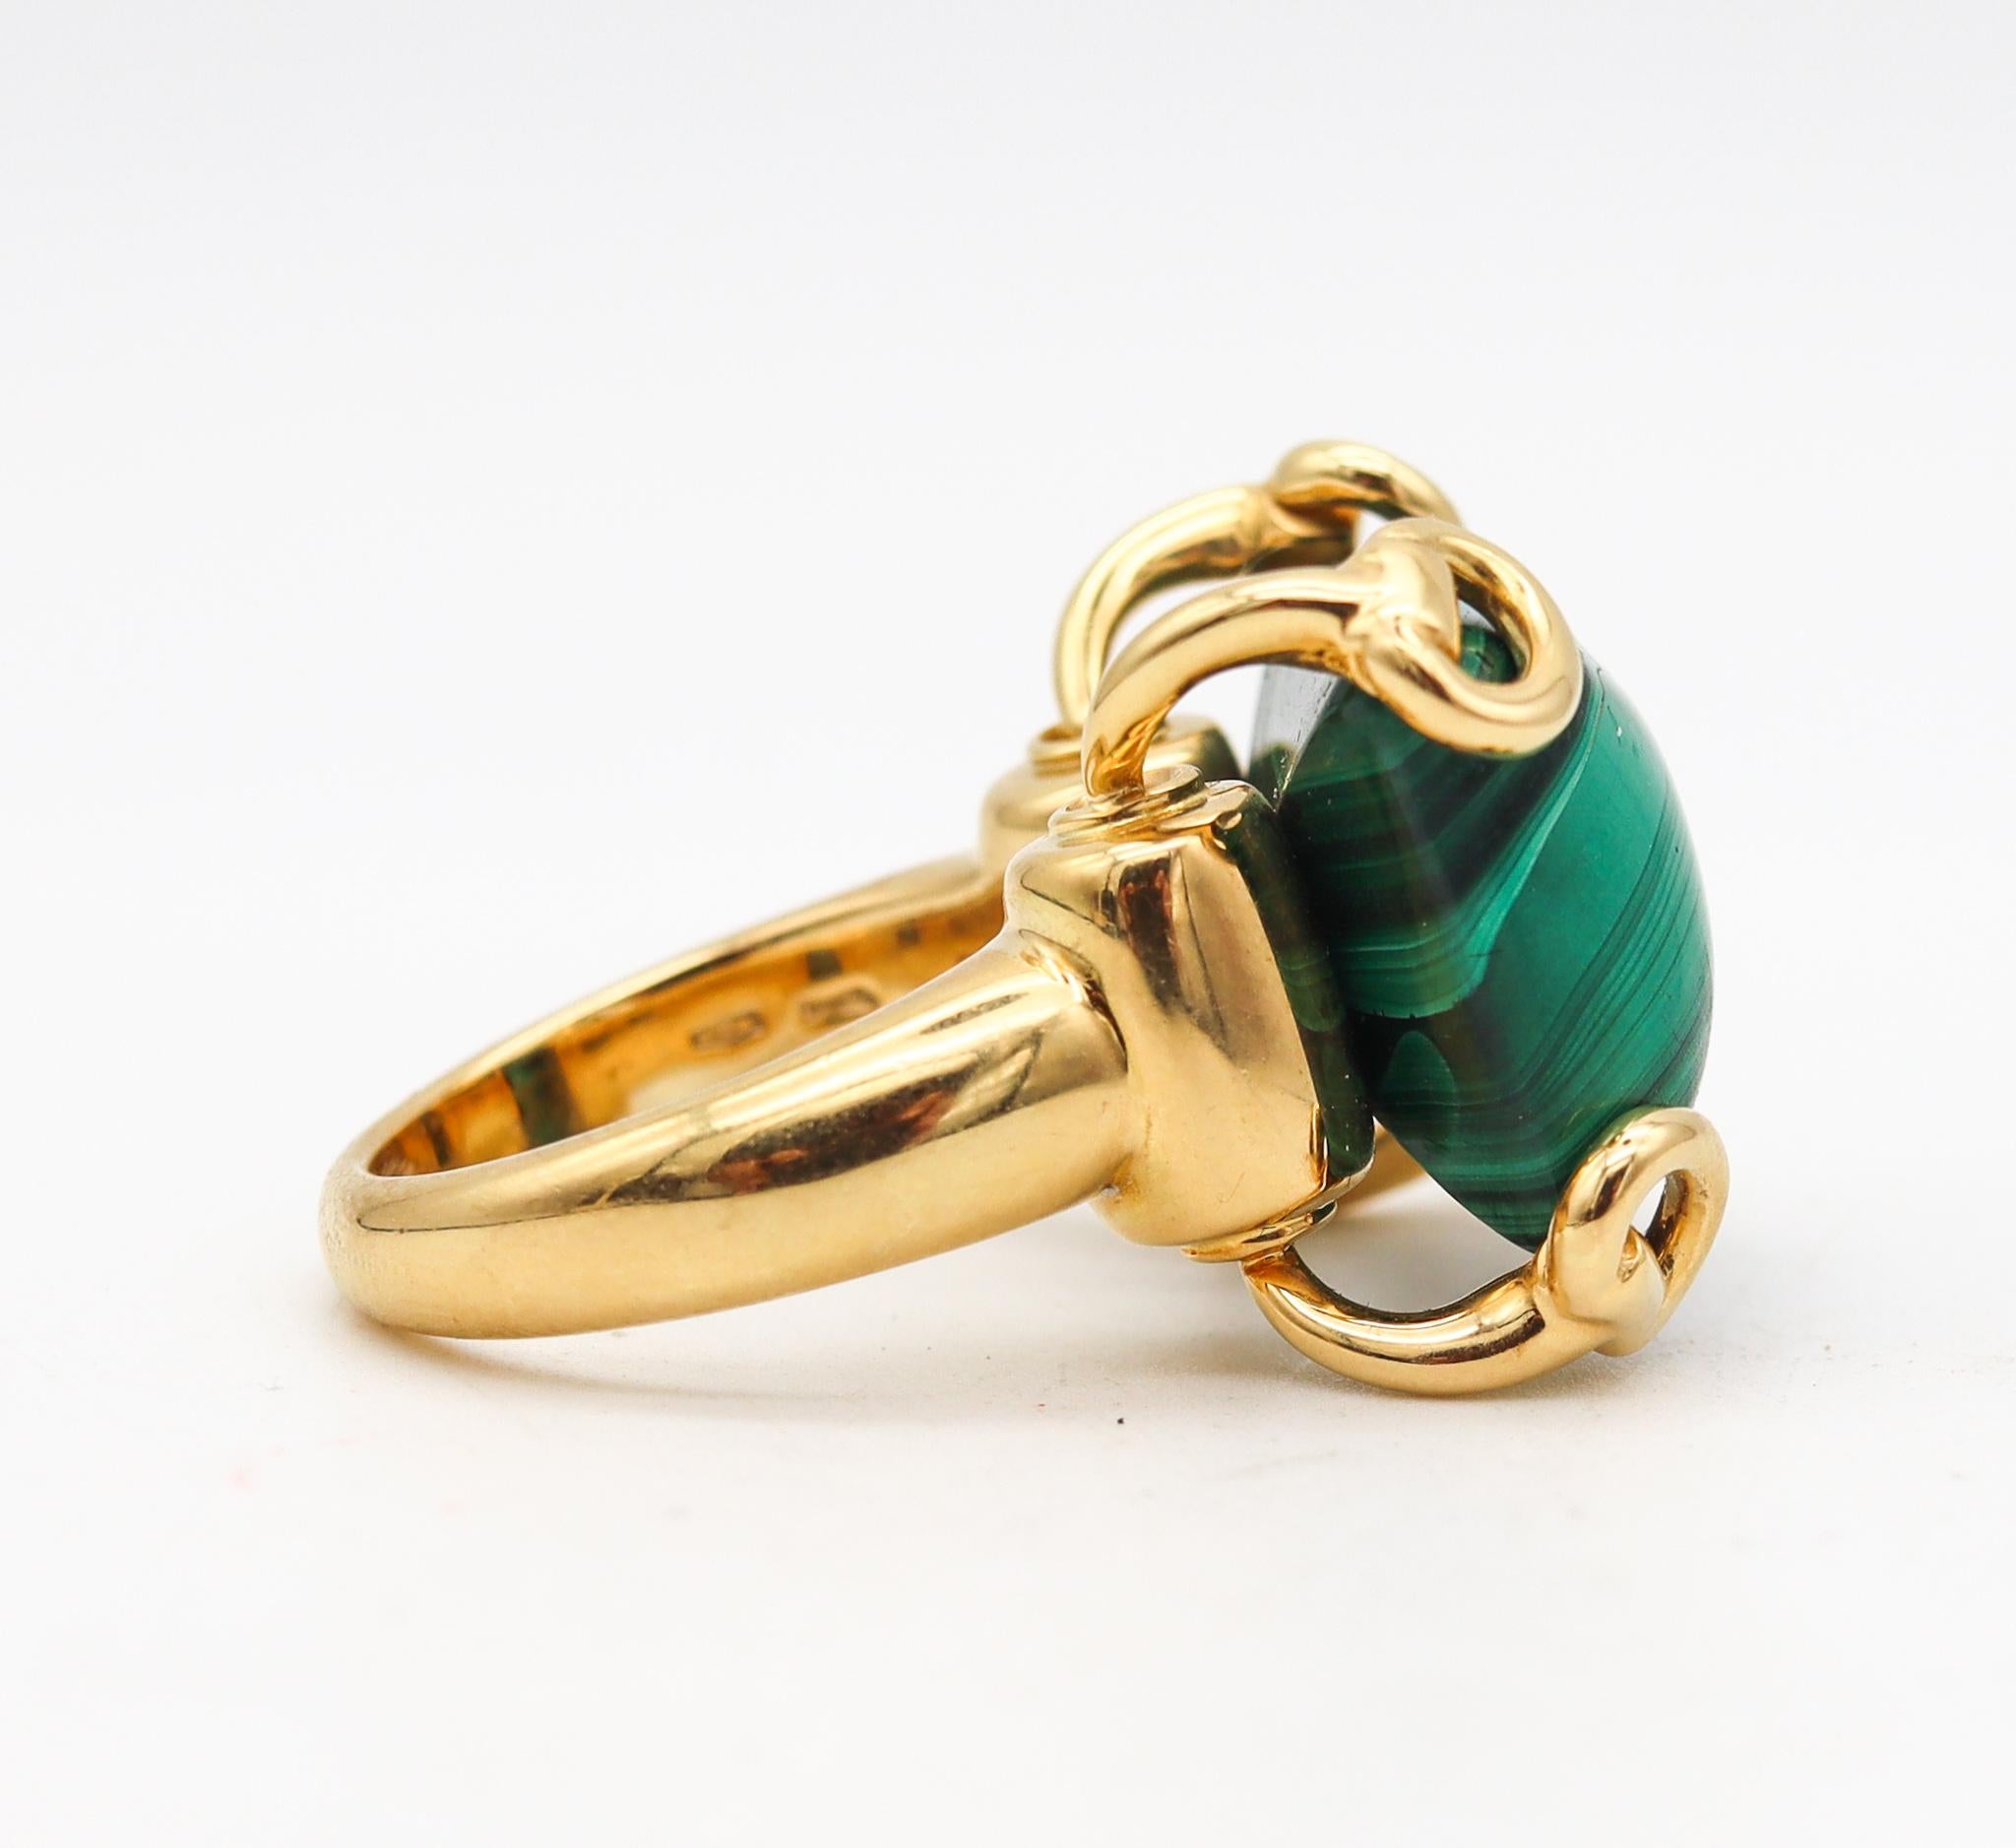 A cocktail ring with malachite designed by Gucci.

This large horse-bit cocktail ring is one of the most Iconic and popular models created by the fashion and jewelry house of Gucci, in the late 20th century. This beautiful ring has been crafted in